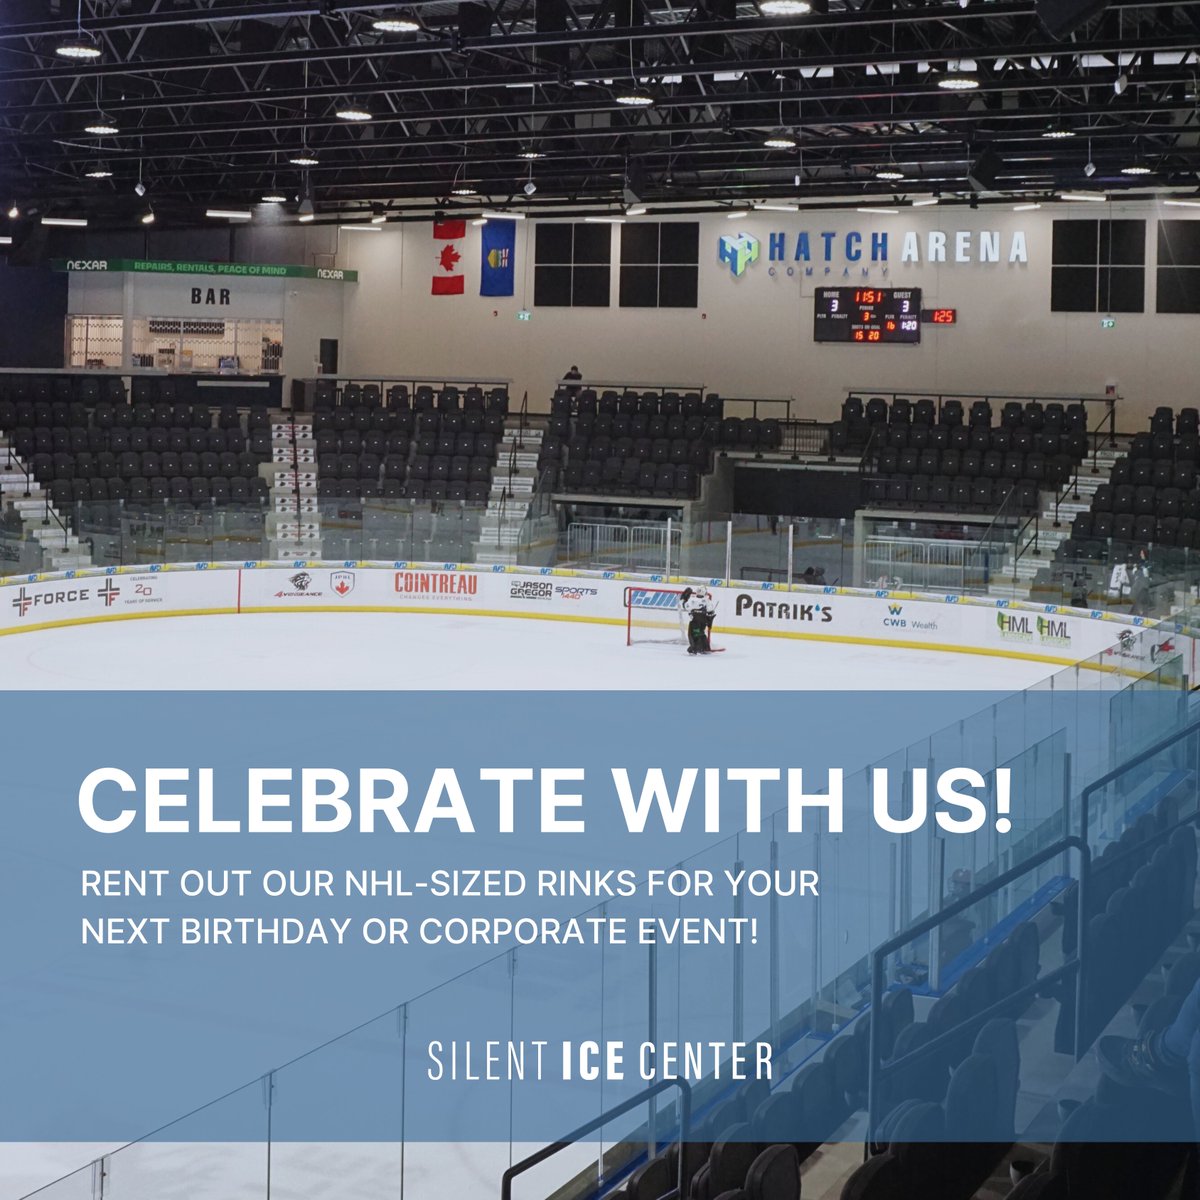 Did you know anyone can rent out our rinks? 🏒 Celebrate your next event with the SIC! Whether it’s a birthday party, a corporate event, or something else! We’d love to host your group at our premium facility 🧊 #SkateSIC #SilentIceCenter #Niskuab #yegicerinks #edmontonevents